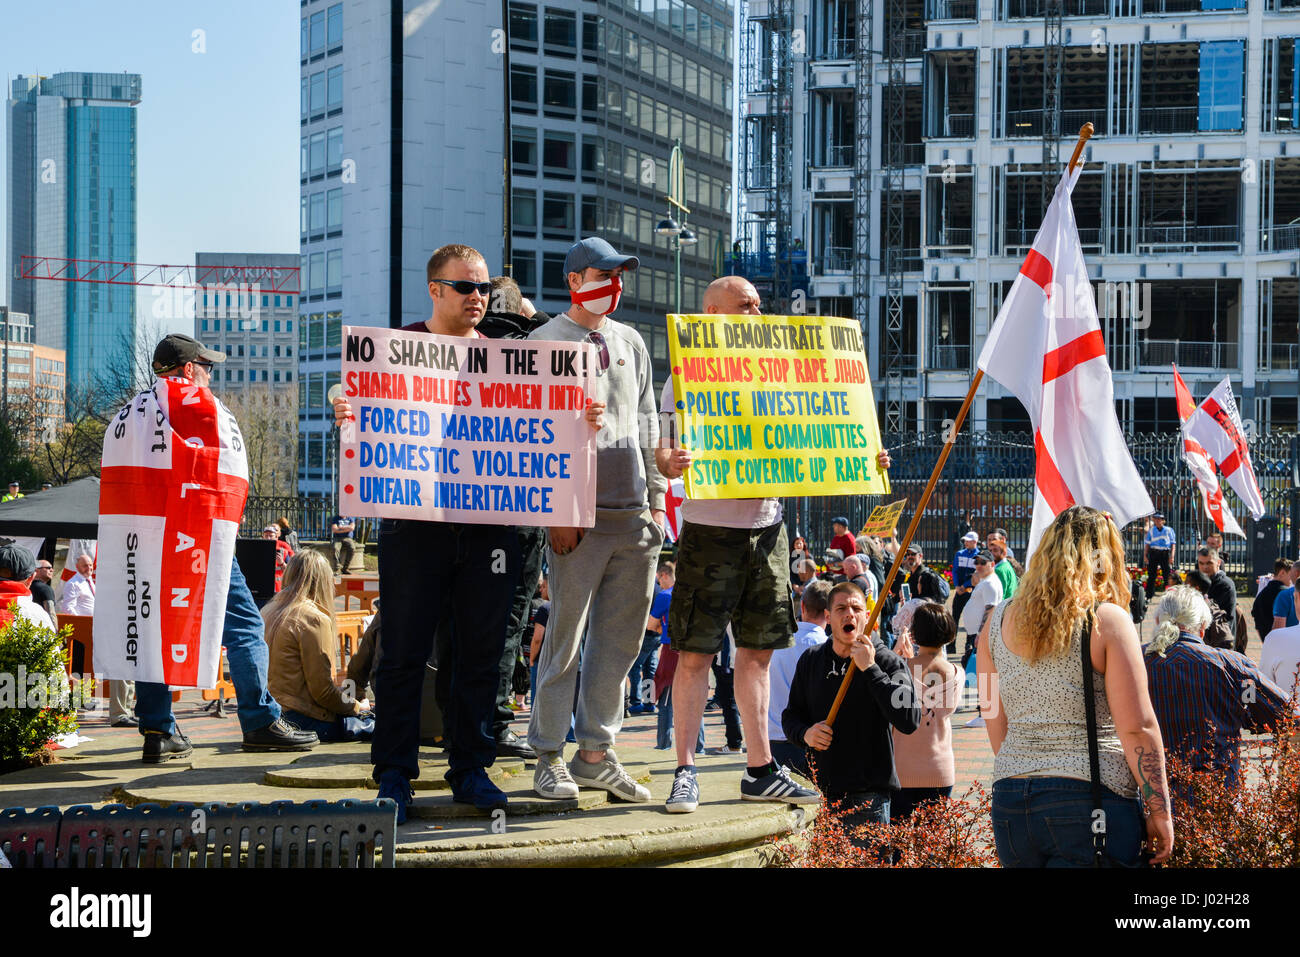 Birmingham, UK. 8th April, 2017. On the aftermath of the terrorist attacks in London on March 22nd, the English Defence League (EDL) stages a rally to protest the 'islamisation' of the UK, amongst other issues Credit: Alexandre Rotenberg/Alamy Live News Stock Photo